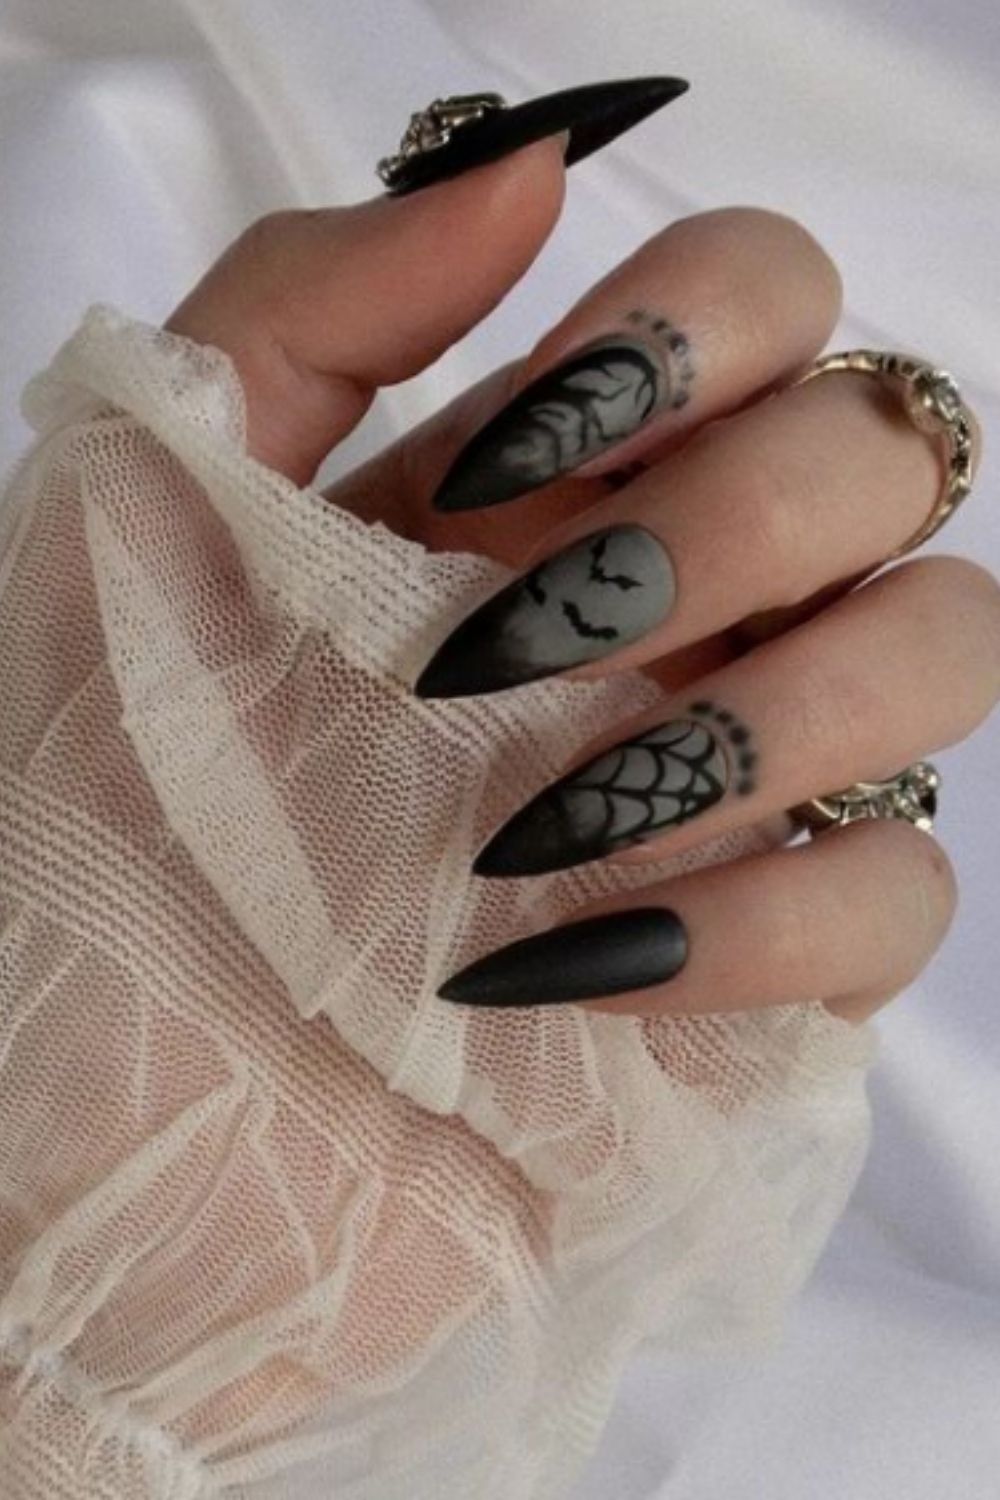 How Can We Style Halloween Nail?